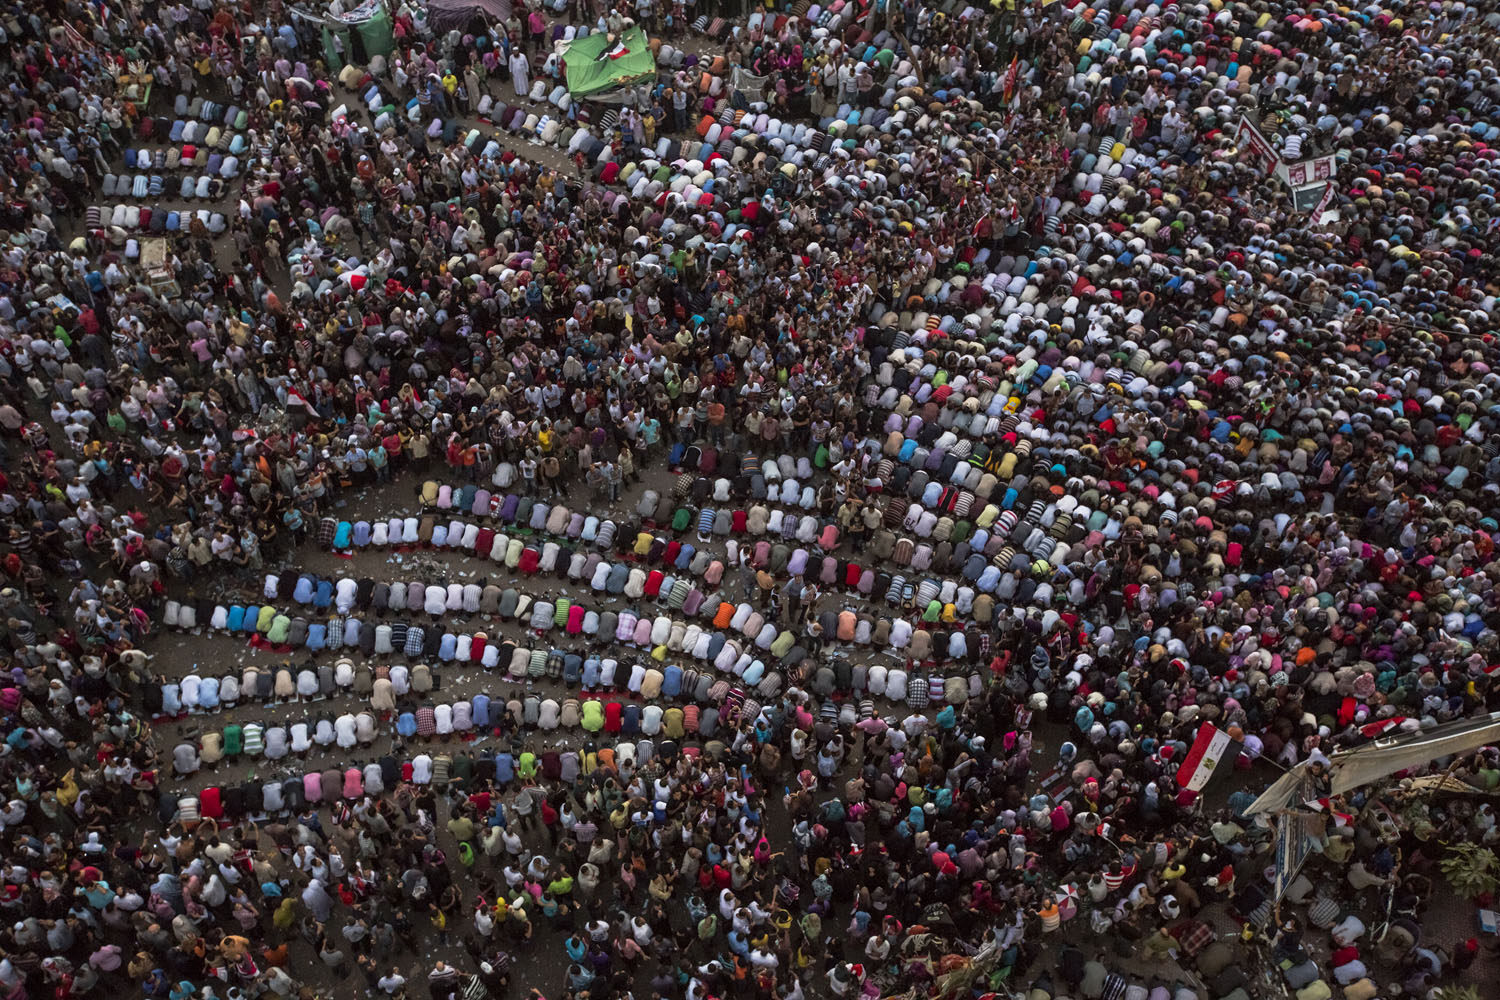 June 24, 2012, Cairo. Hundreds in the crowd pray as they celebrate the election of Mohamed Morsy in Tahrir Square.